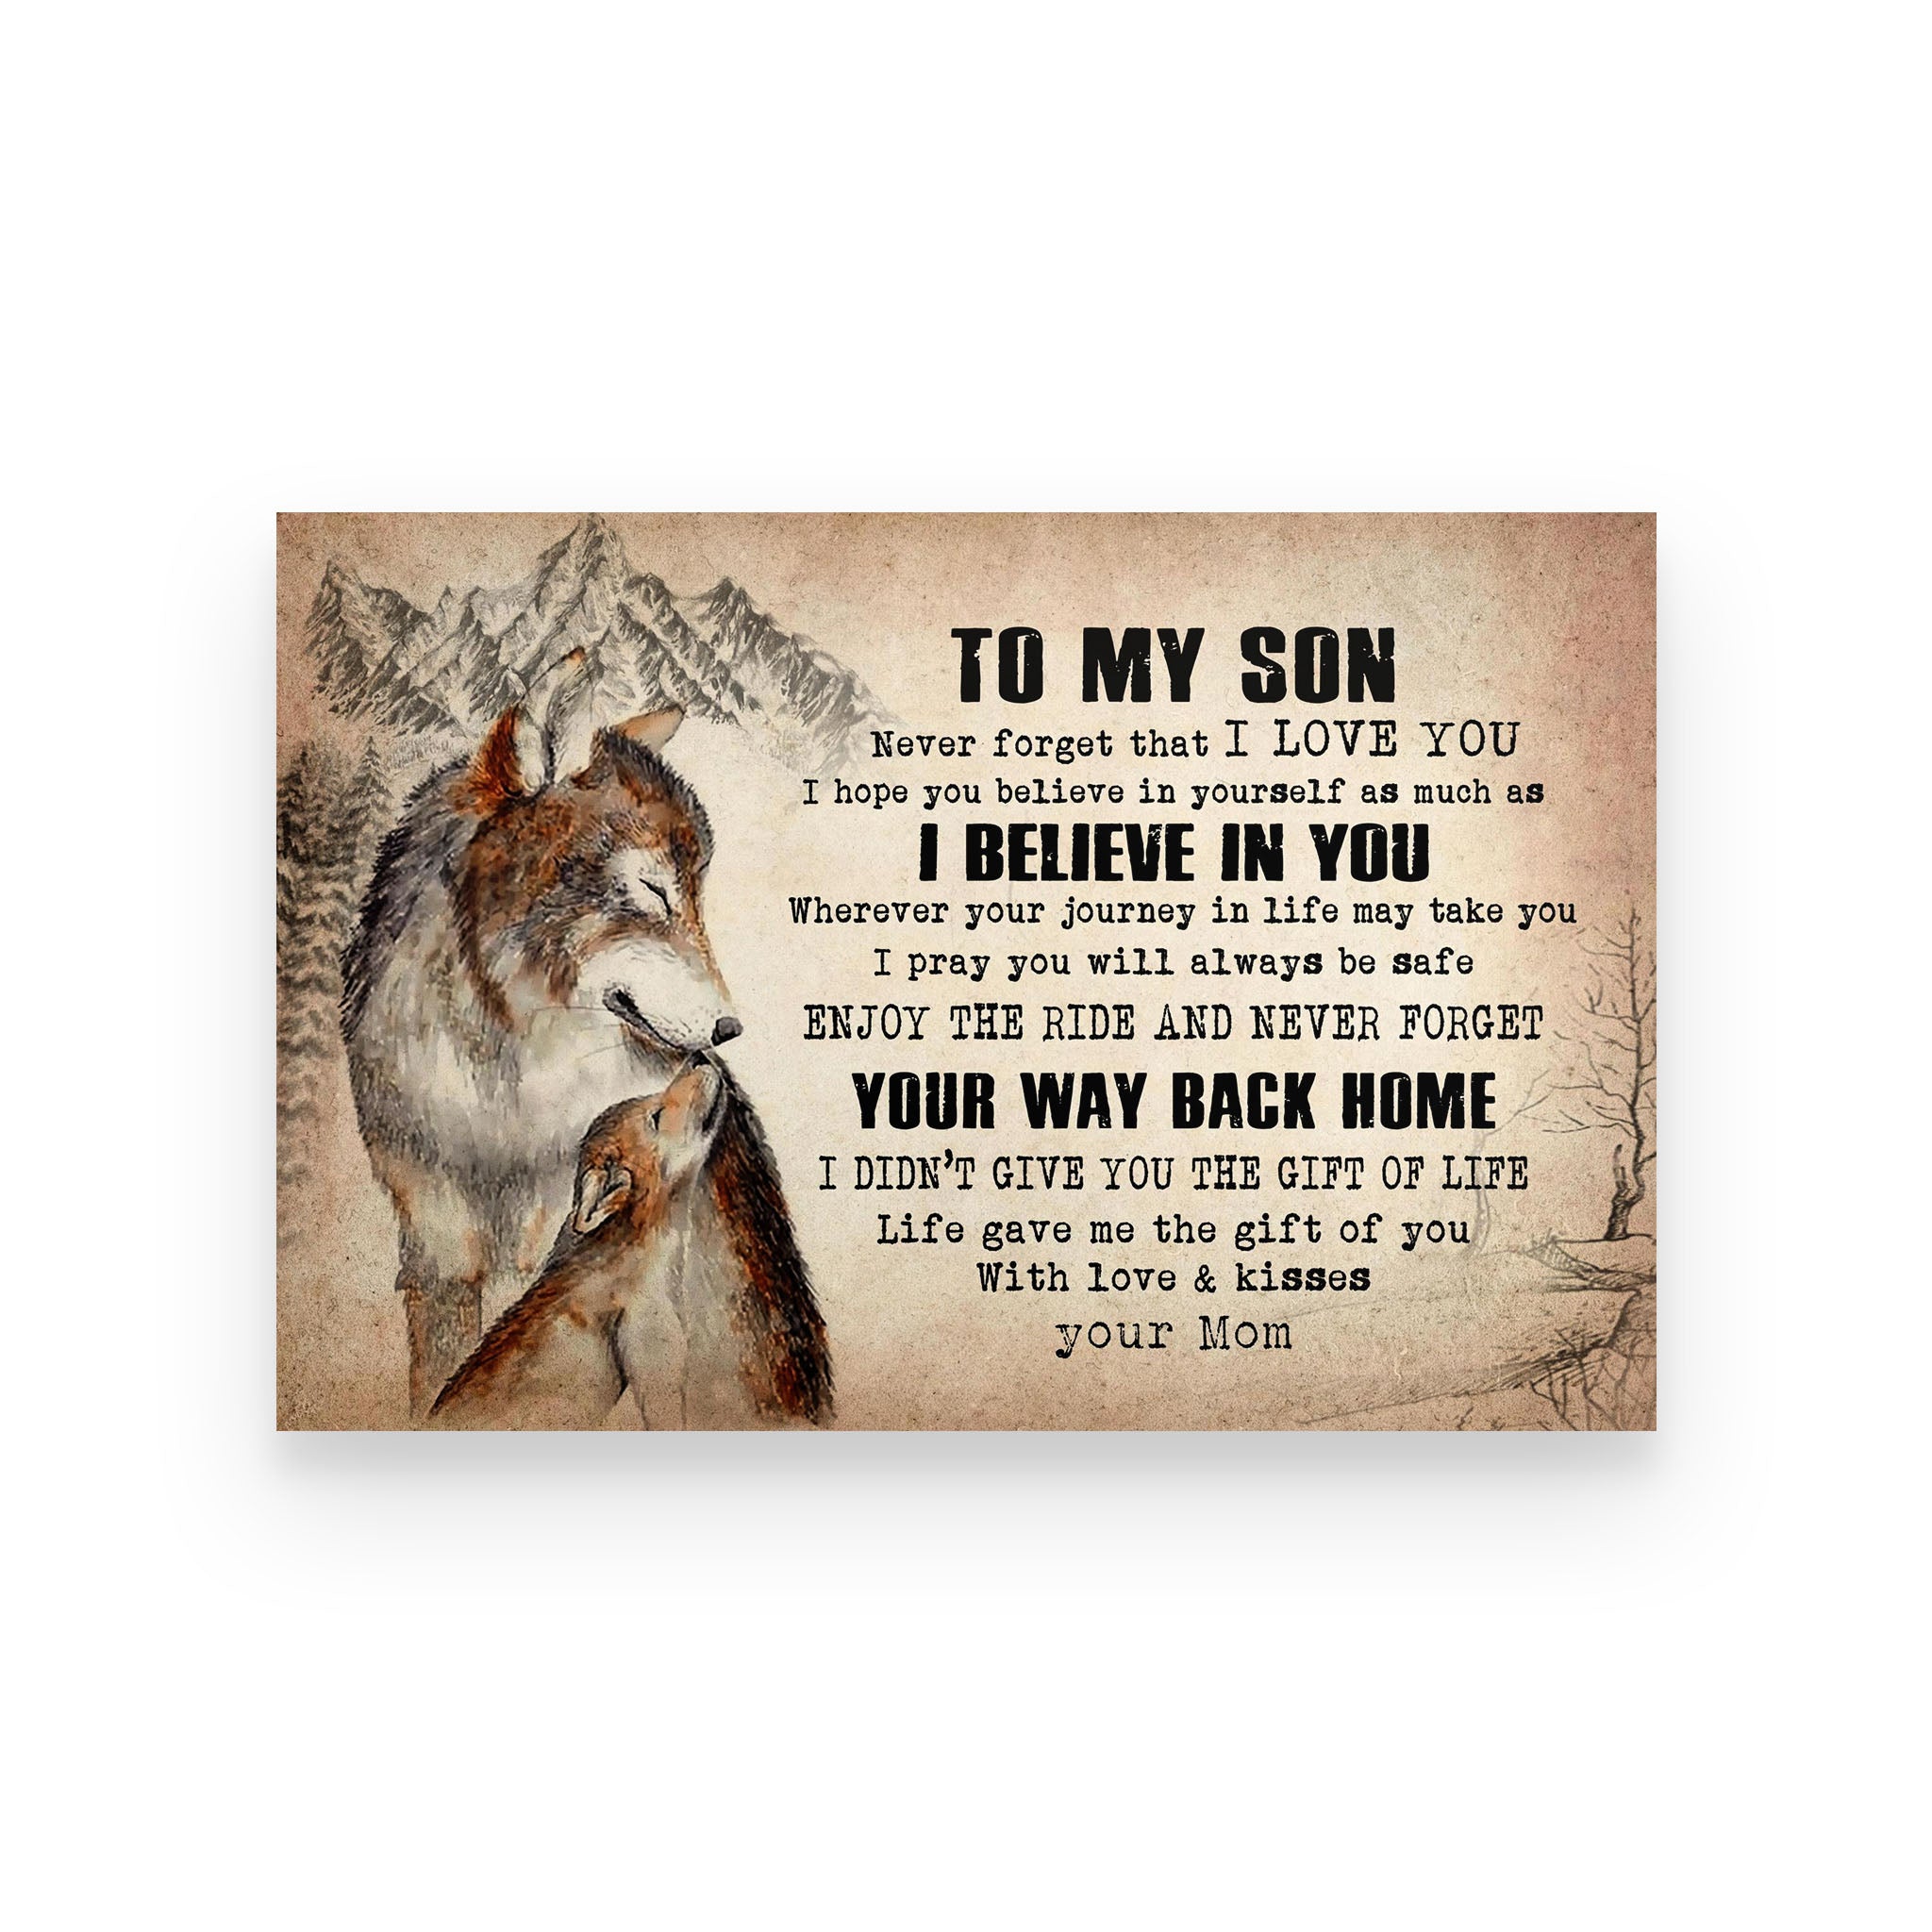 Wolf poster Mom to Son Never forget that I love you enjoy the ride and never forget your way back home